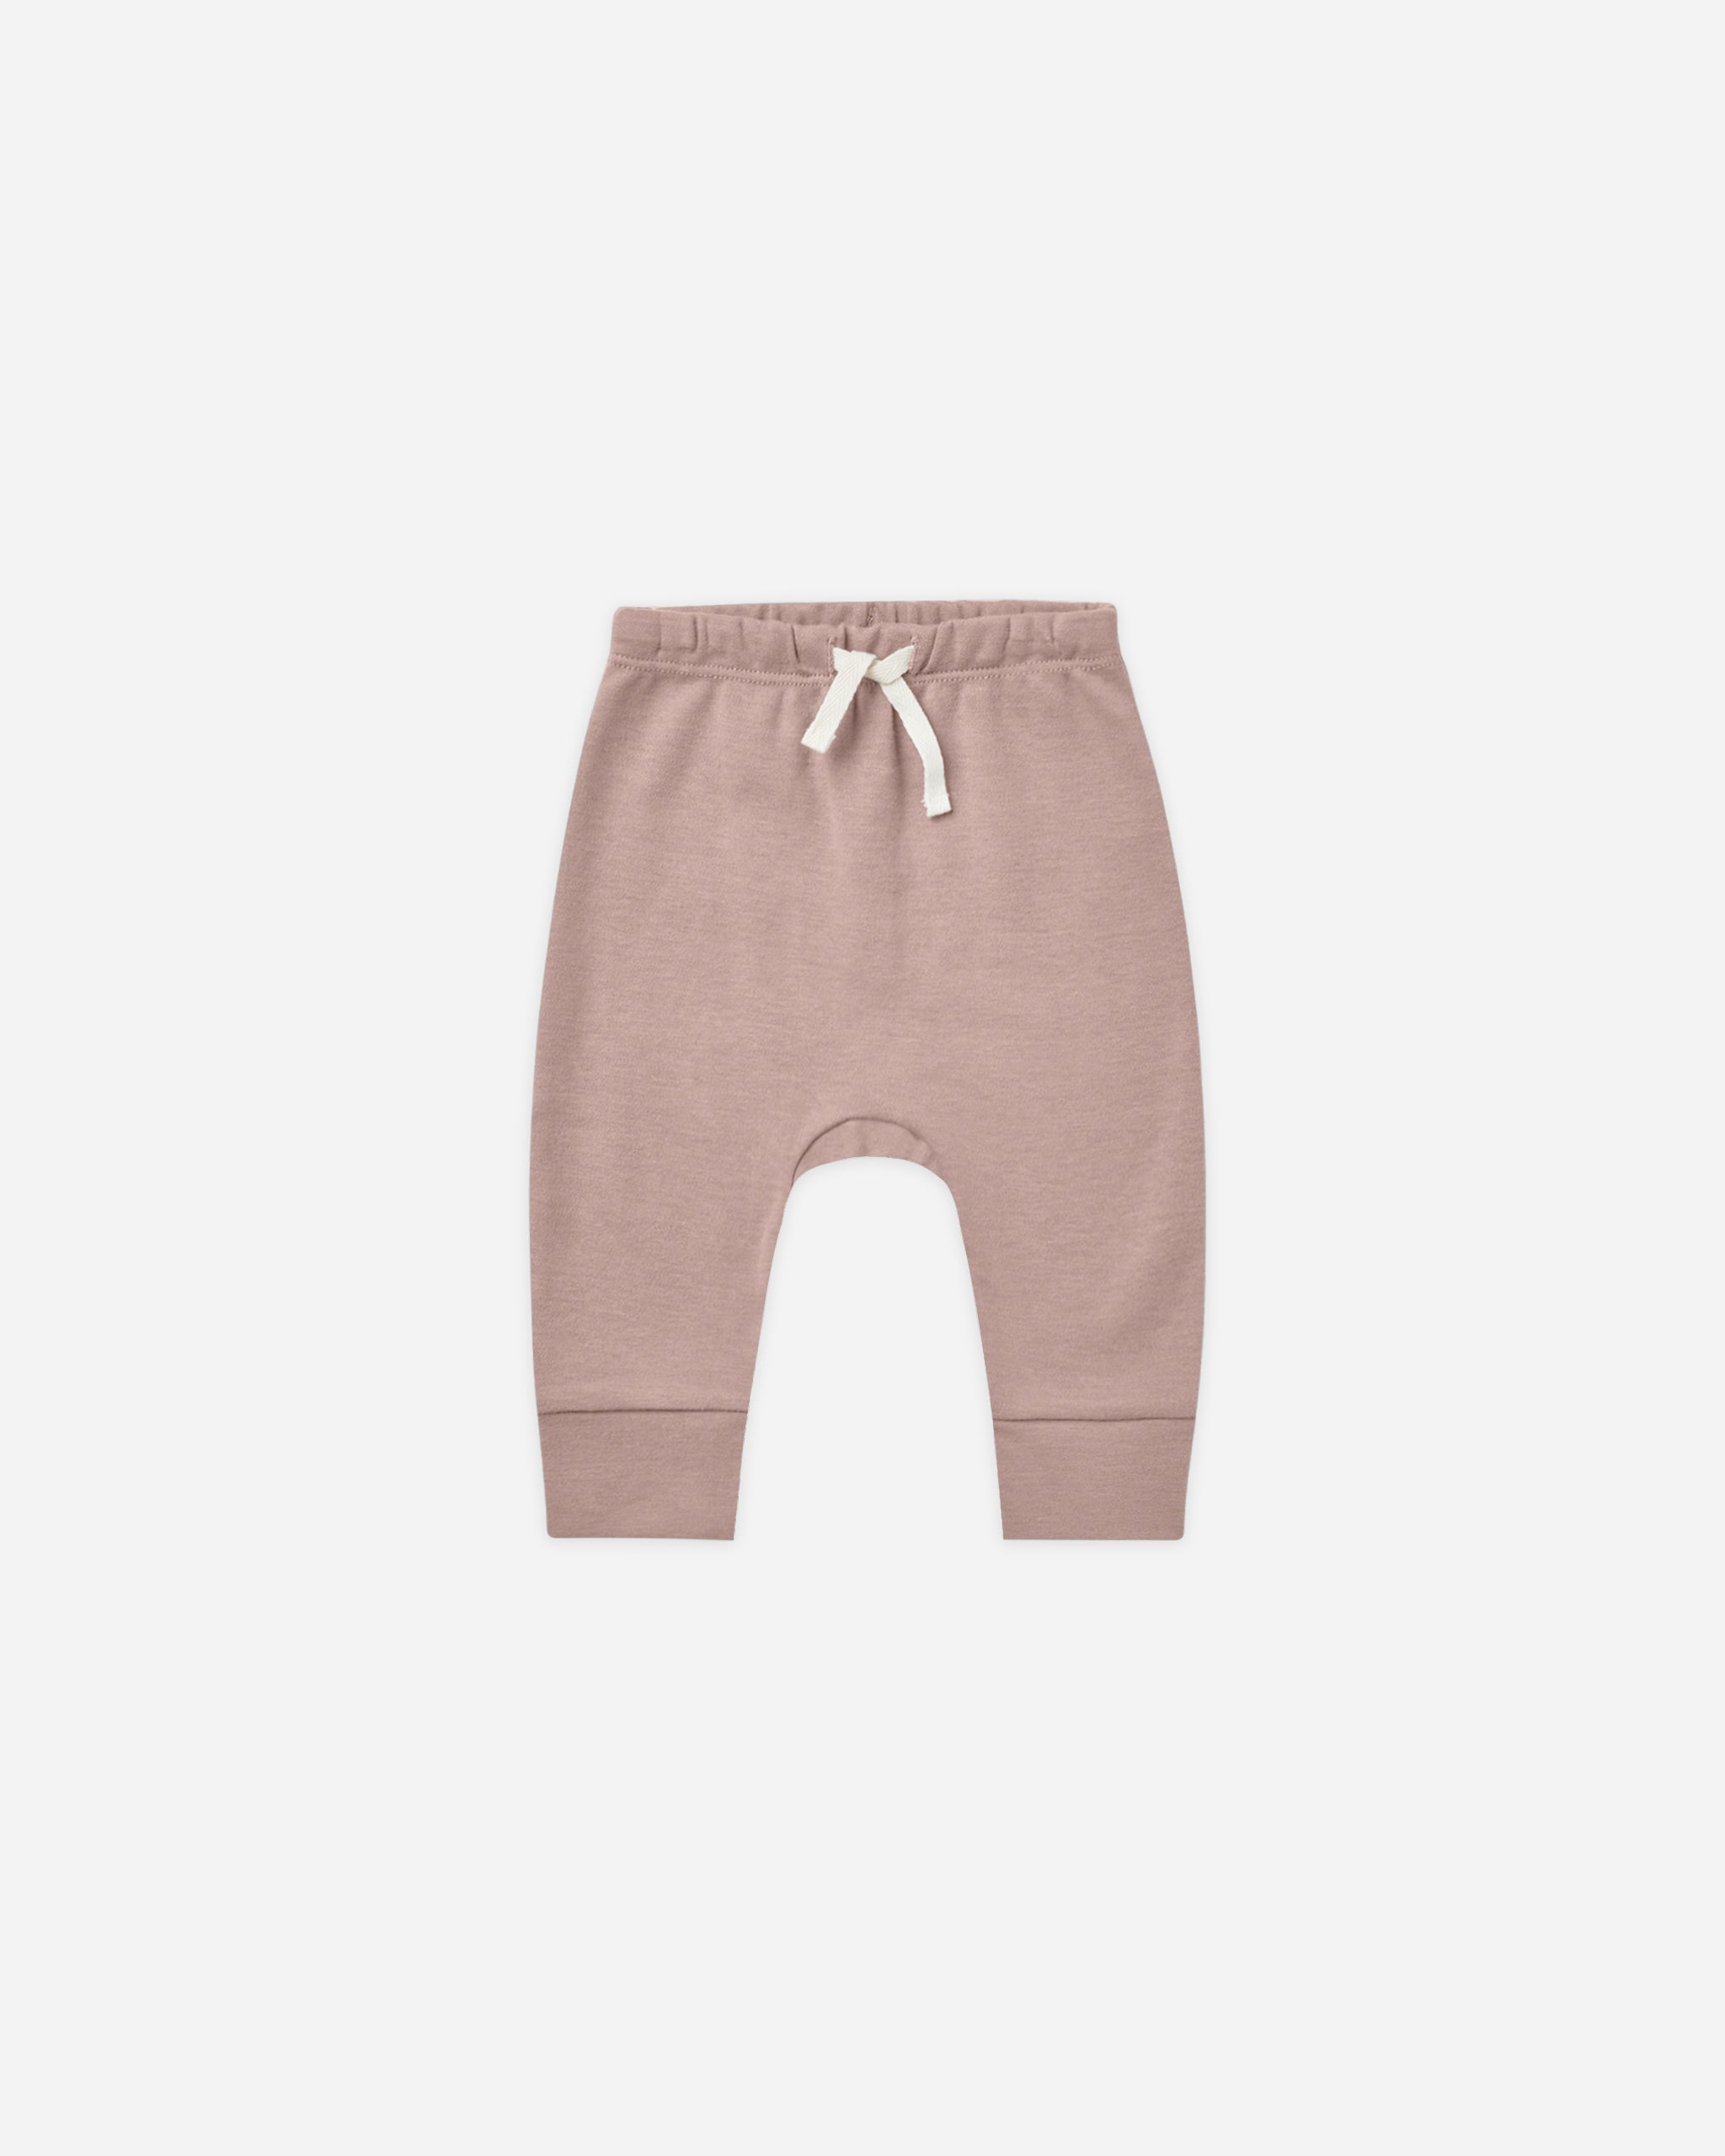 Drawstring Pant || Mauve - Rylee + Cru | Kids Clothes | Trendy Baby Clothes | Modern Infant Outfits |